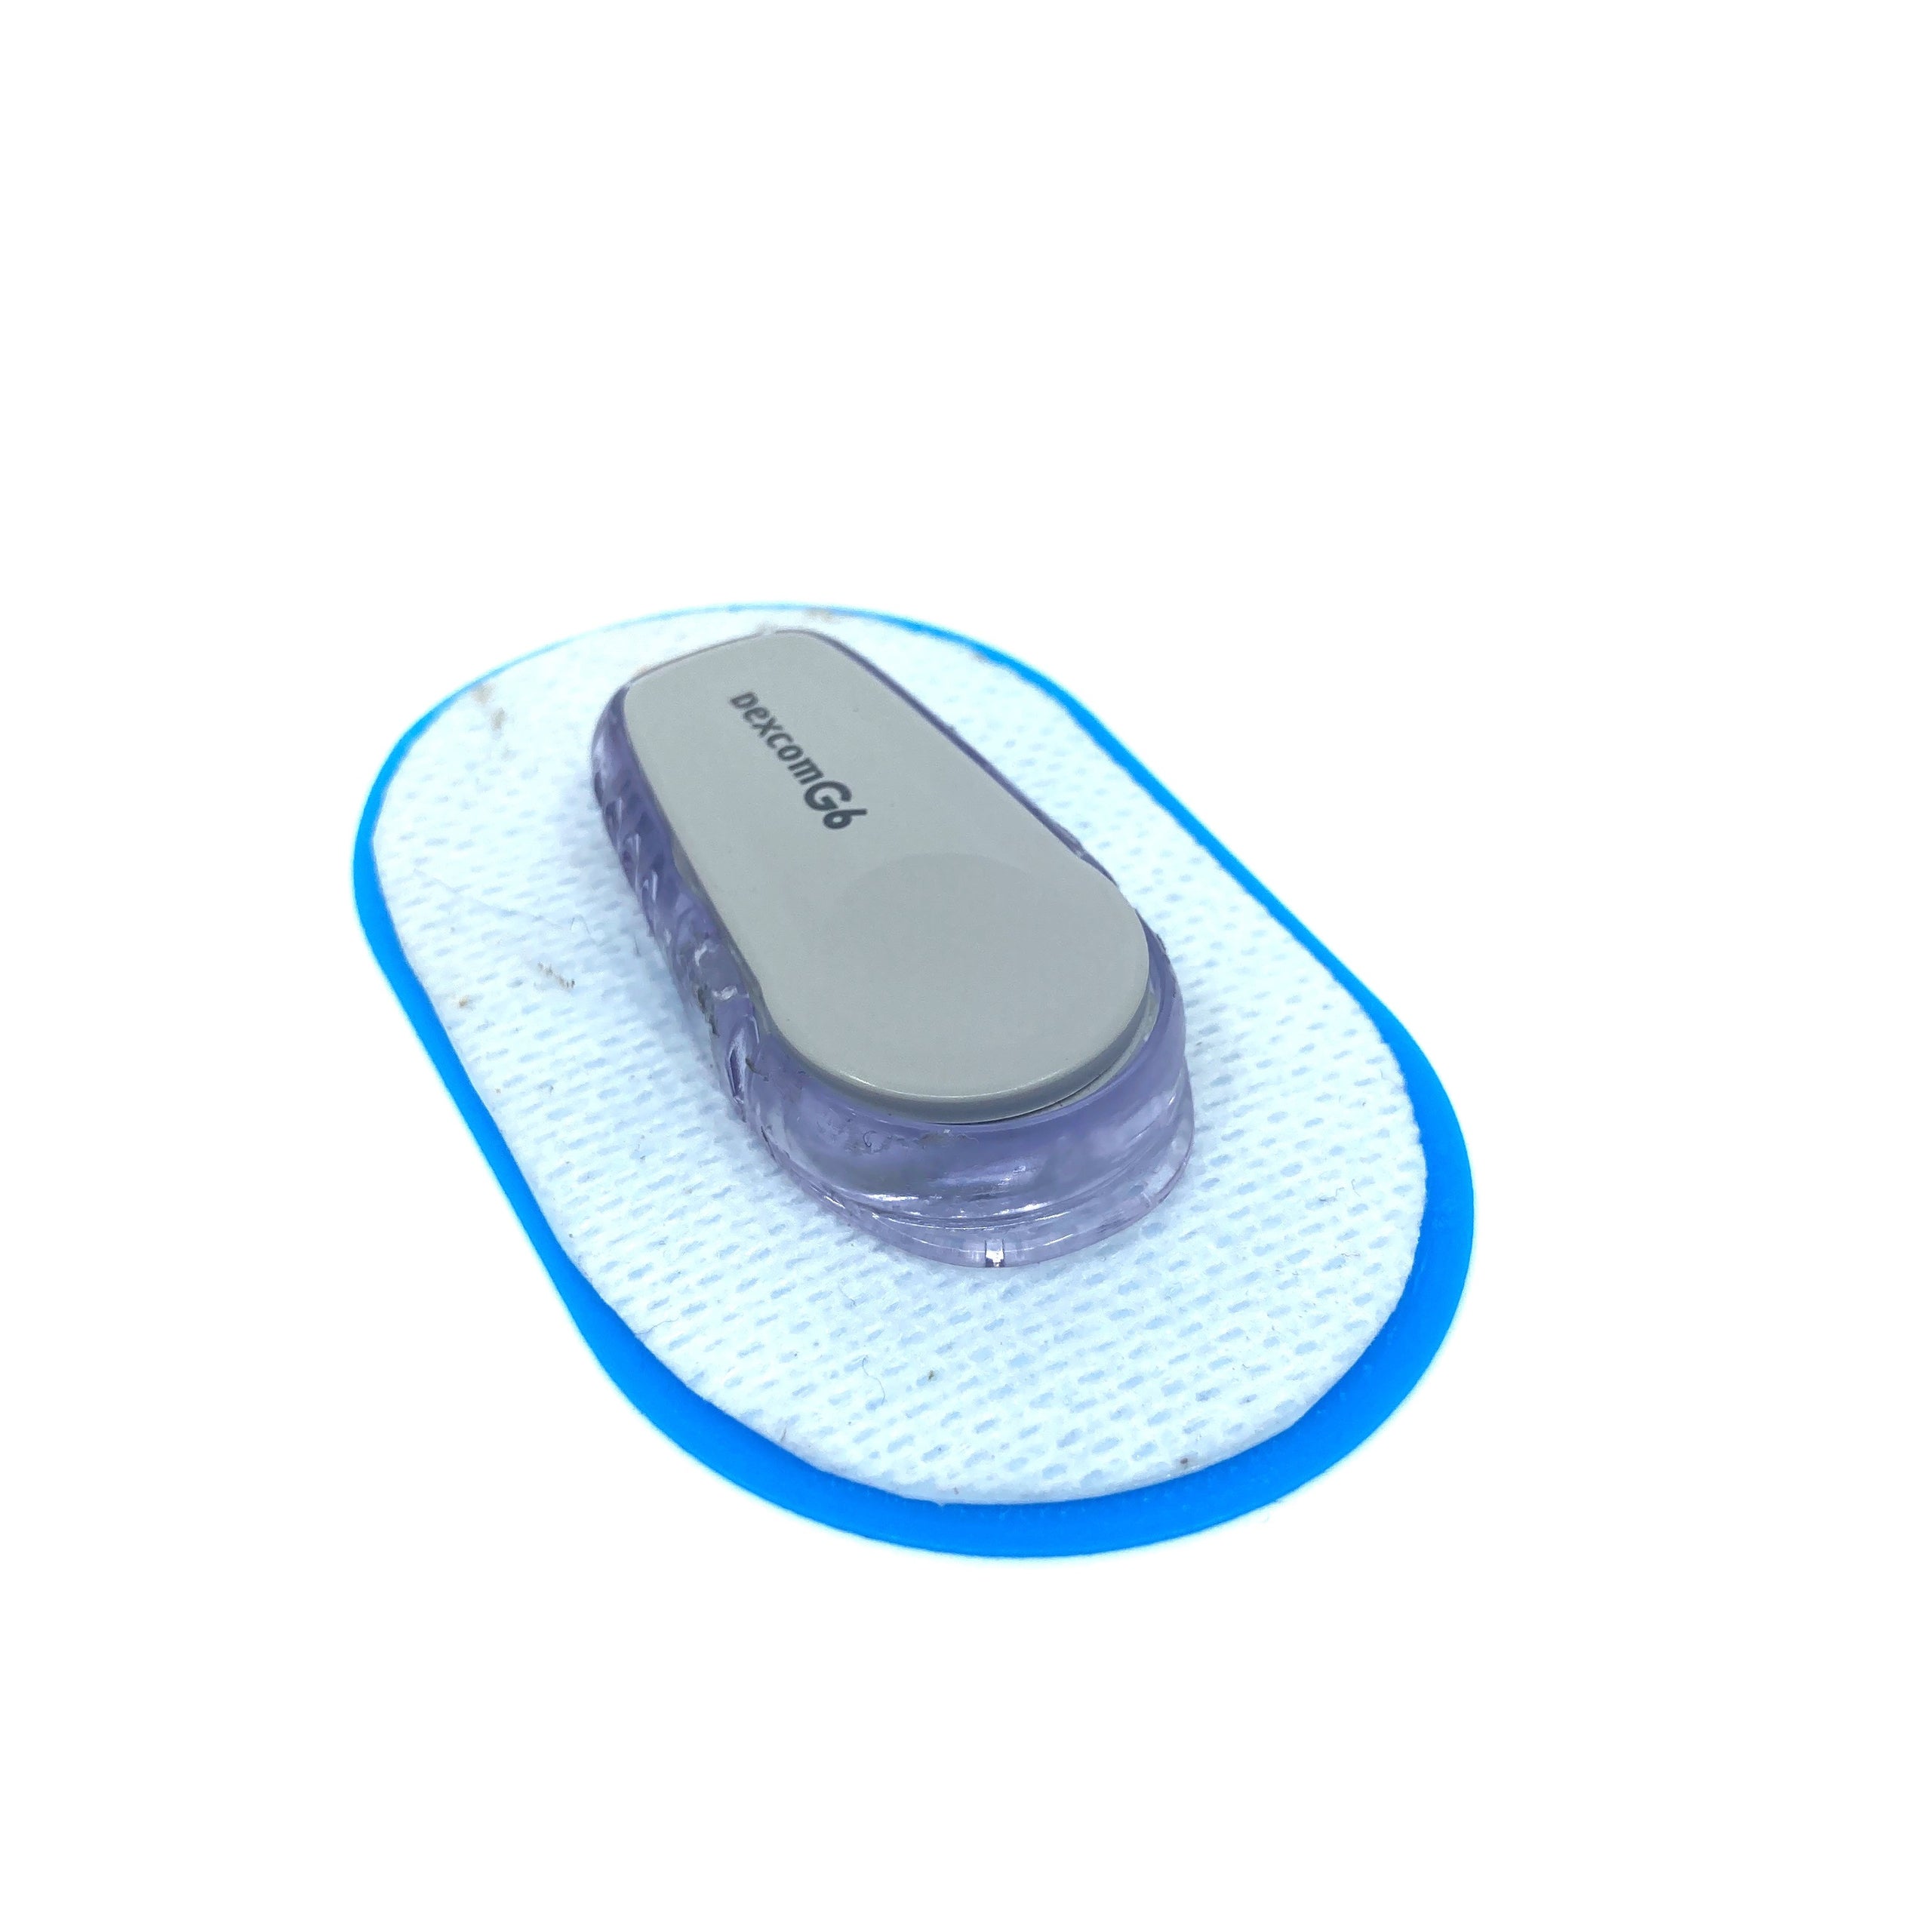 The Clear G6 Shield for Your Dexcom Over Patches Diabetic Accessory | Reusable and Washable | Great Gift for A Diabetic Child or Adult